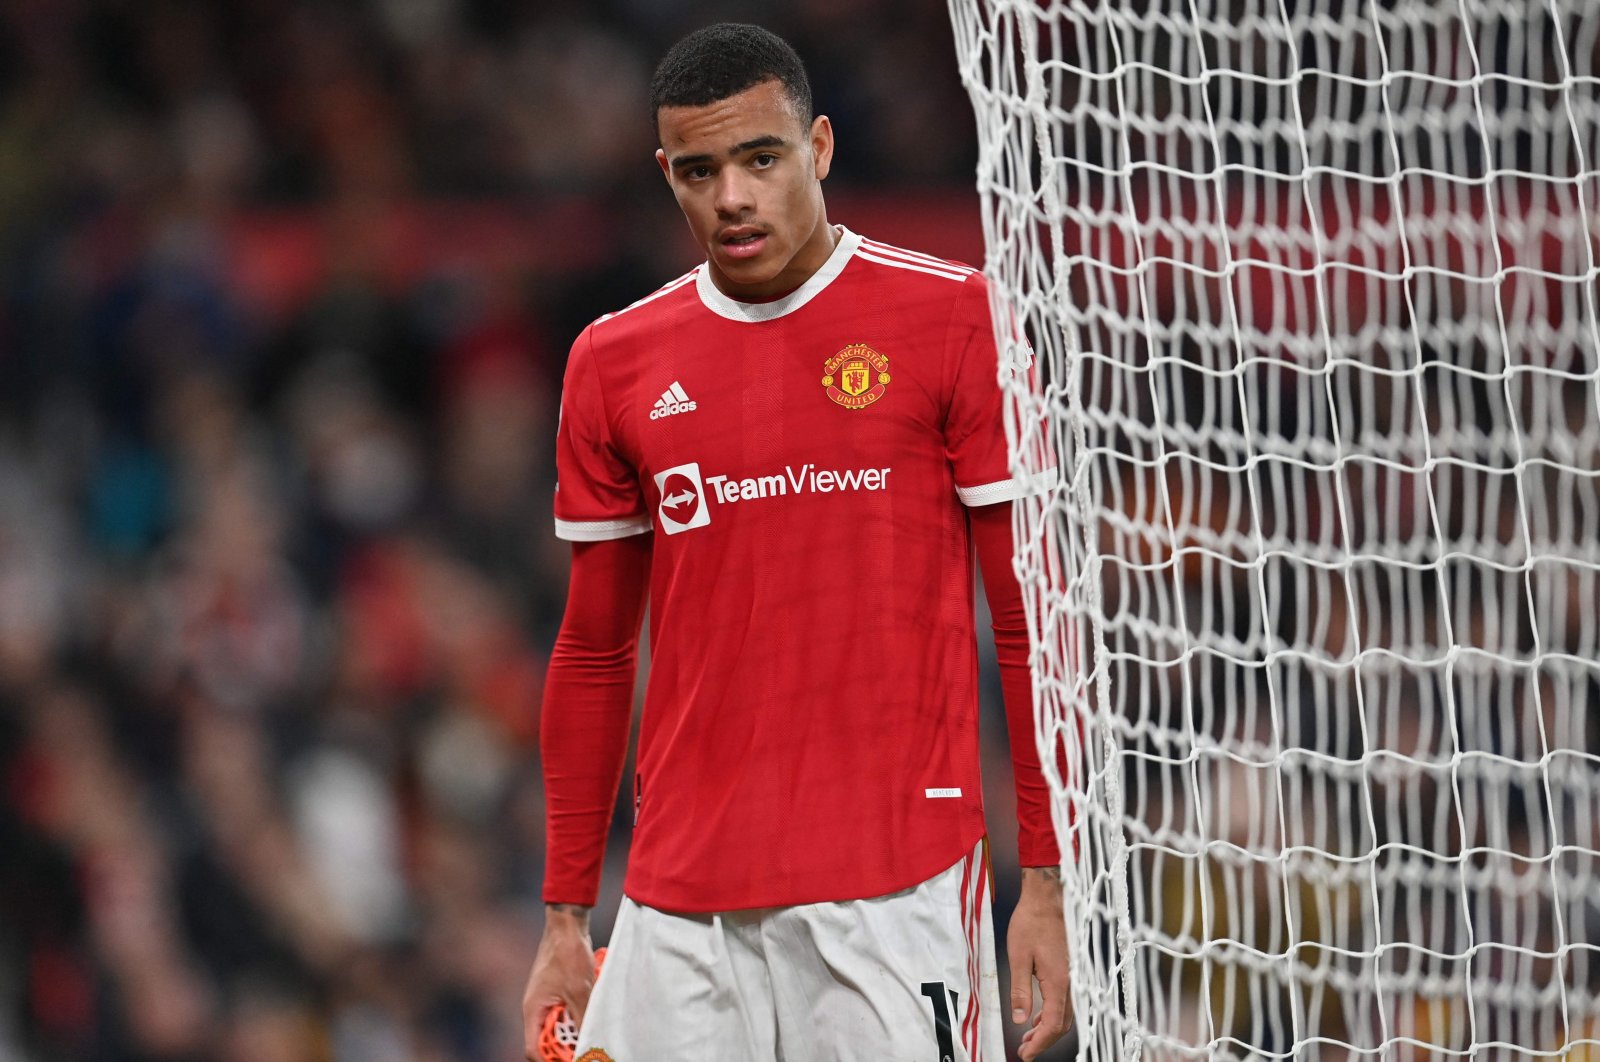 Manchester United&#039;s English striker Mason Greenwood is substituted during the English Premier League football match between Manchester United and Wolverhampton Wanderers at Old Trafford in Manchester, U.K., Jan. 3, 2022. (AFP Photo)